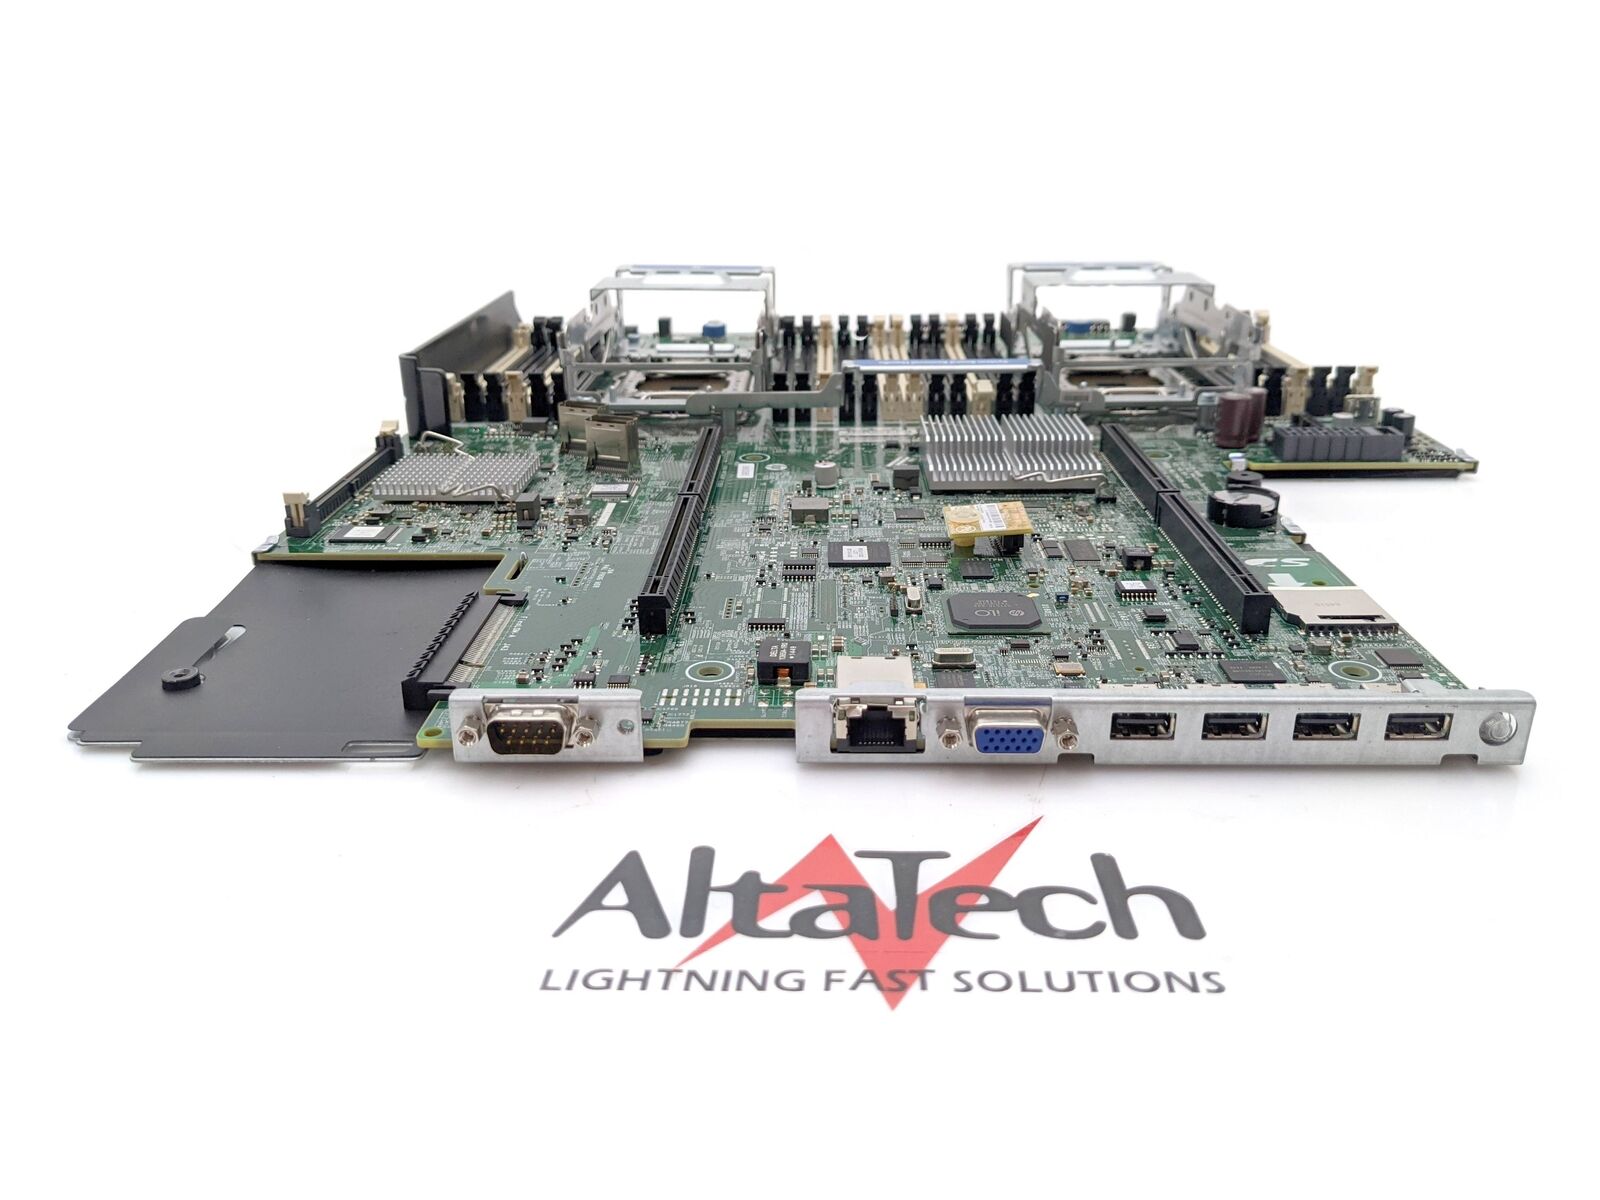 HPE ProLiant DL380 G8 System Motherboard 801939-001, ready for 2x E5-2600 v2